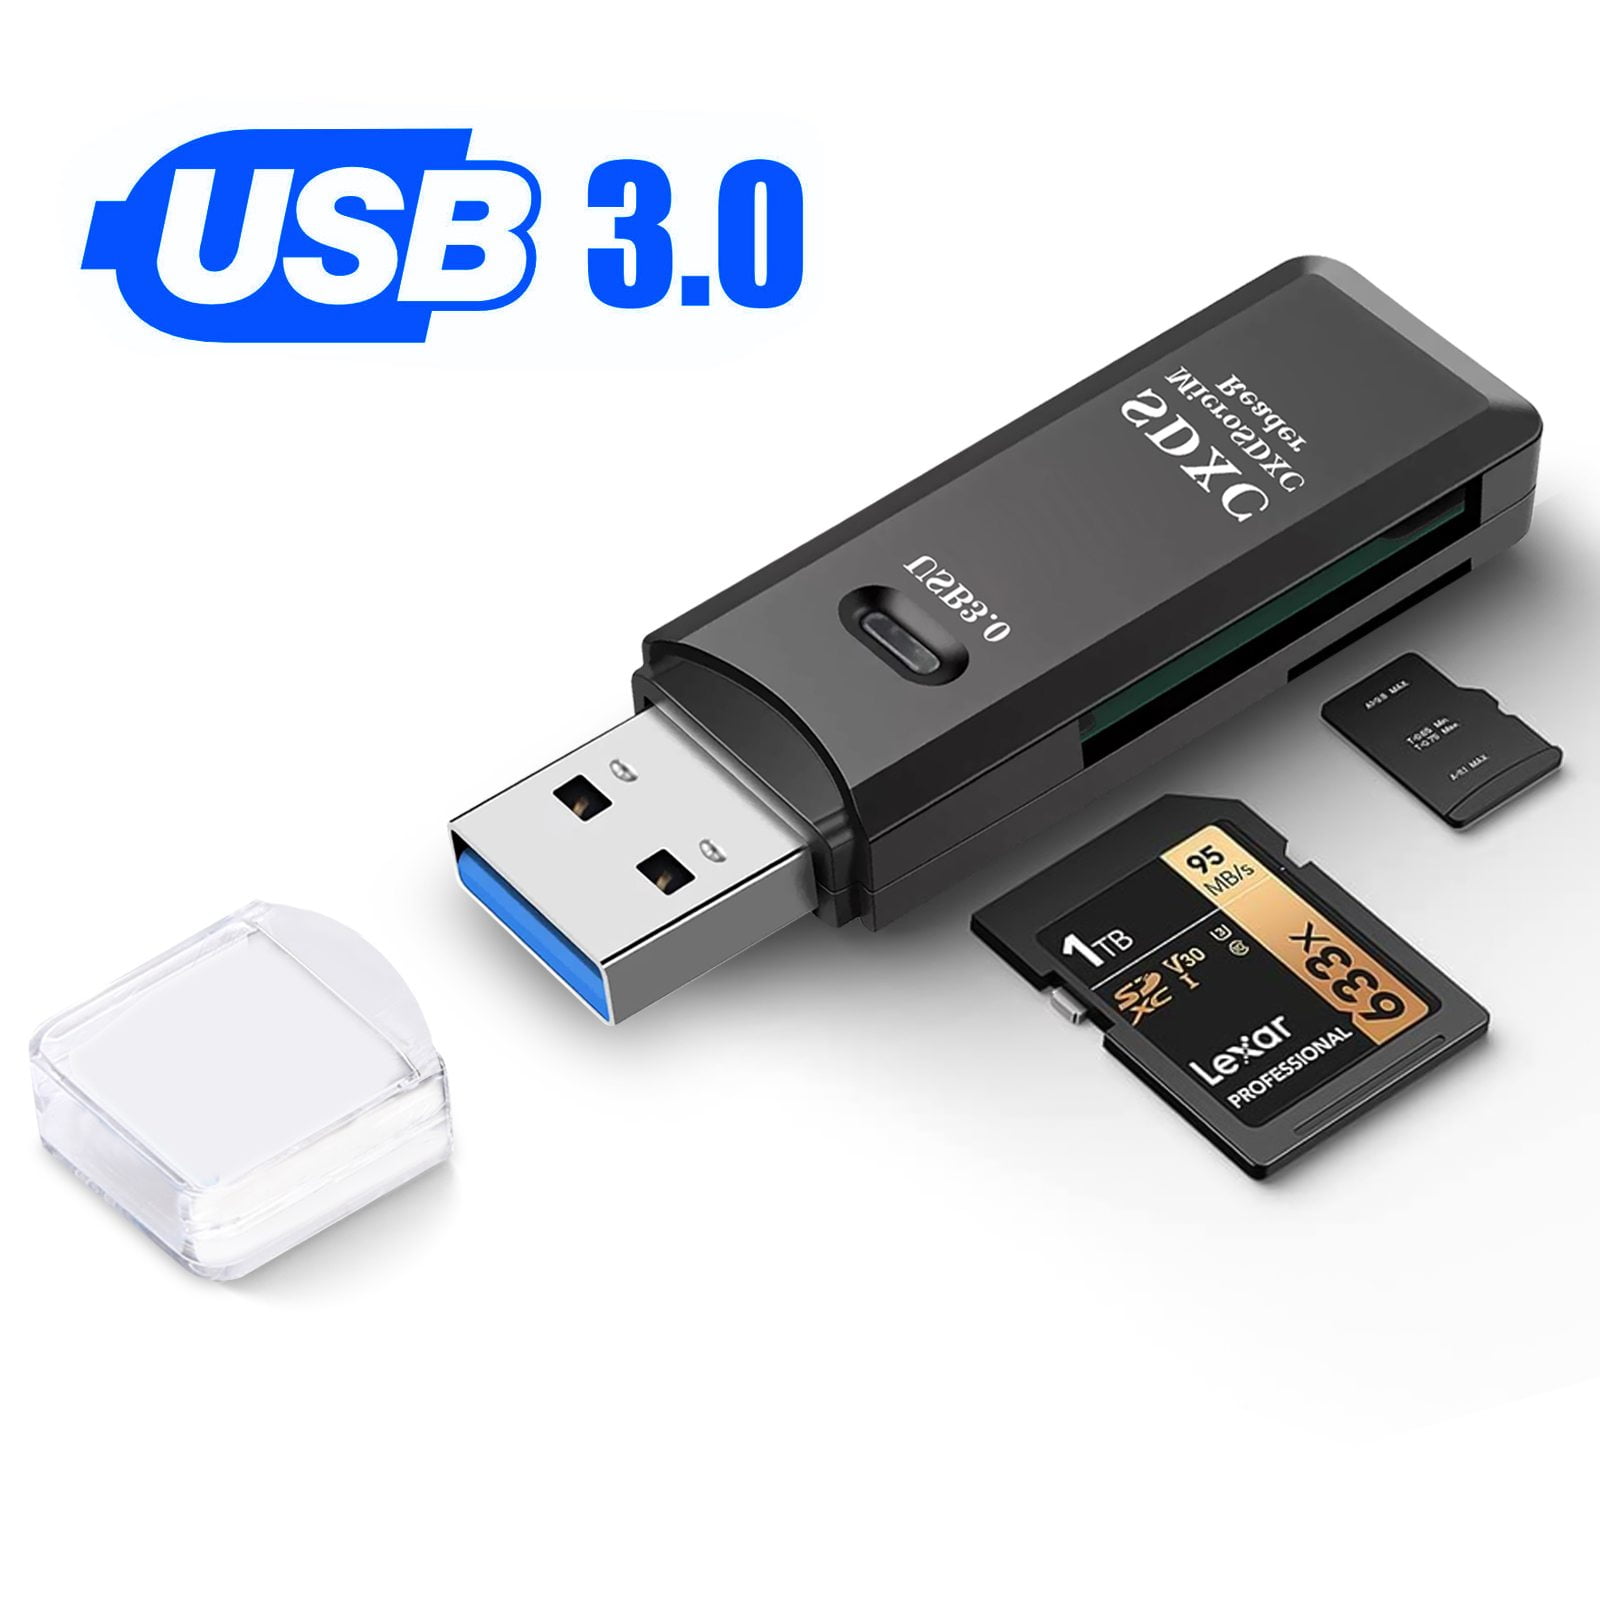 USB 3.0 SD Memory Card Reader SDHC SDXC MMC Micro Mobile Adapter T-FLASH Hot 